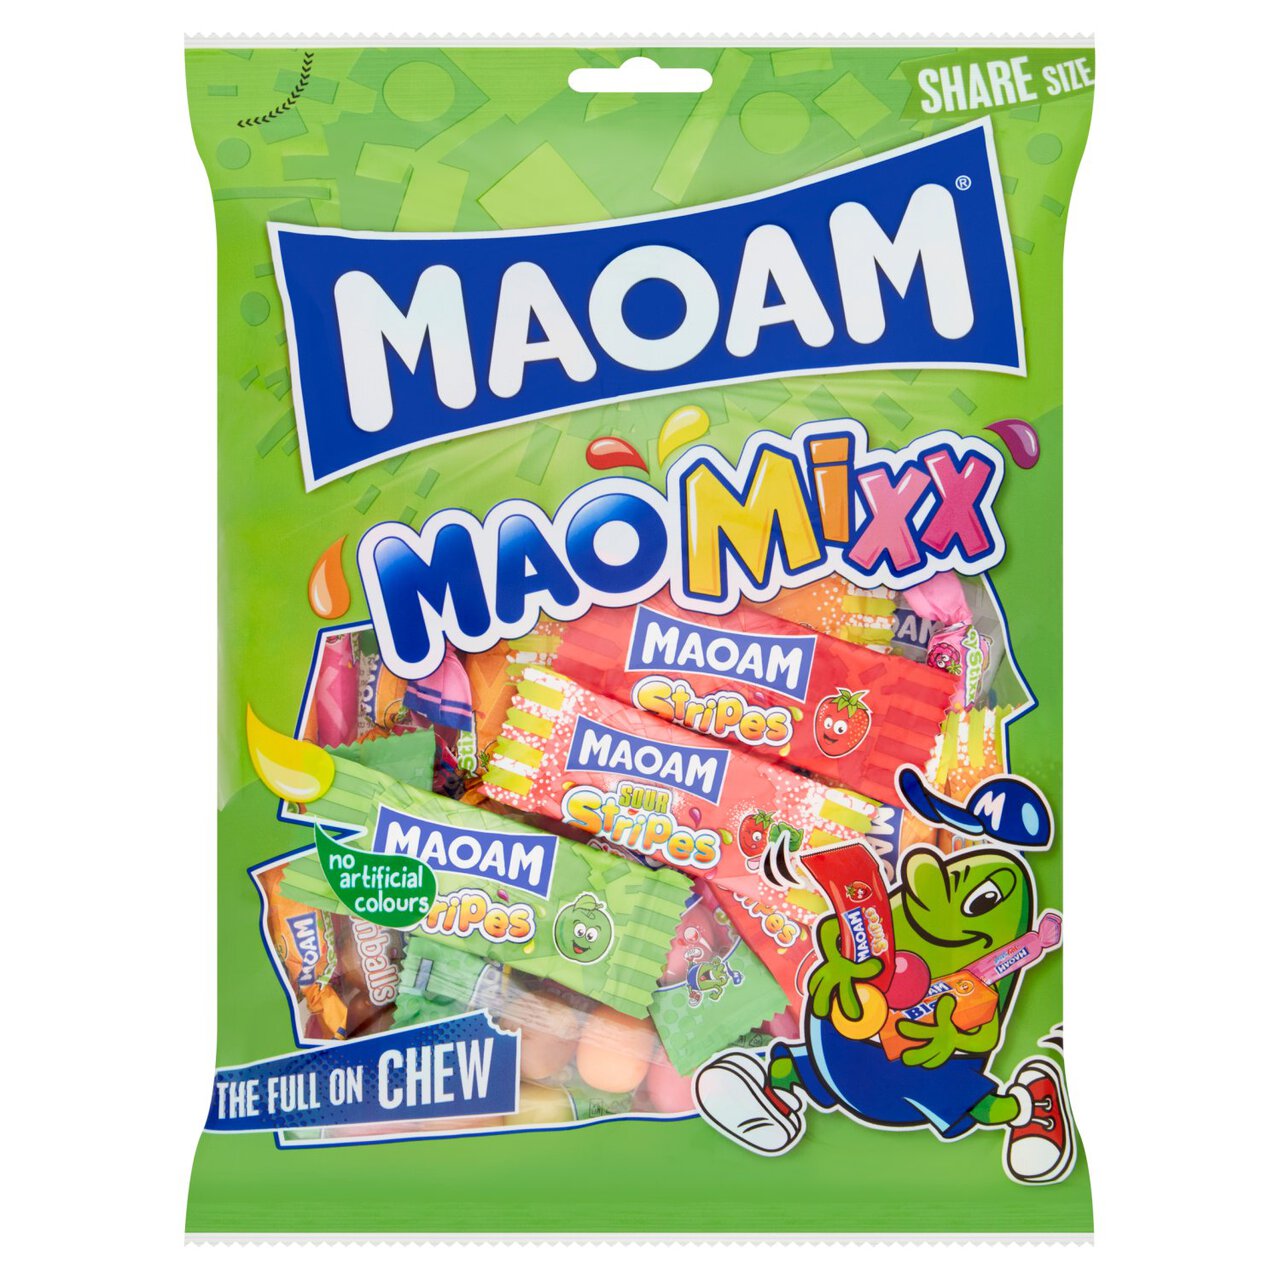 Maoam Mao Mix Chewy Wrapped Sweets Sharing Bag 350g 350g